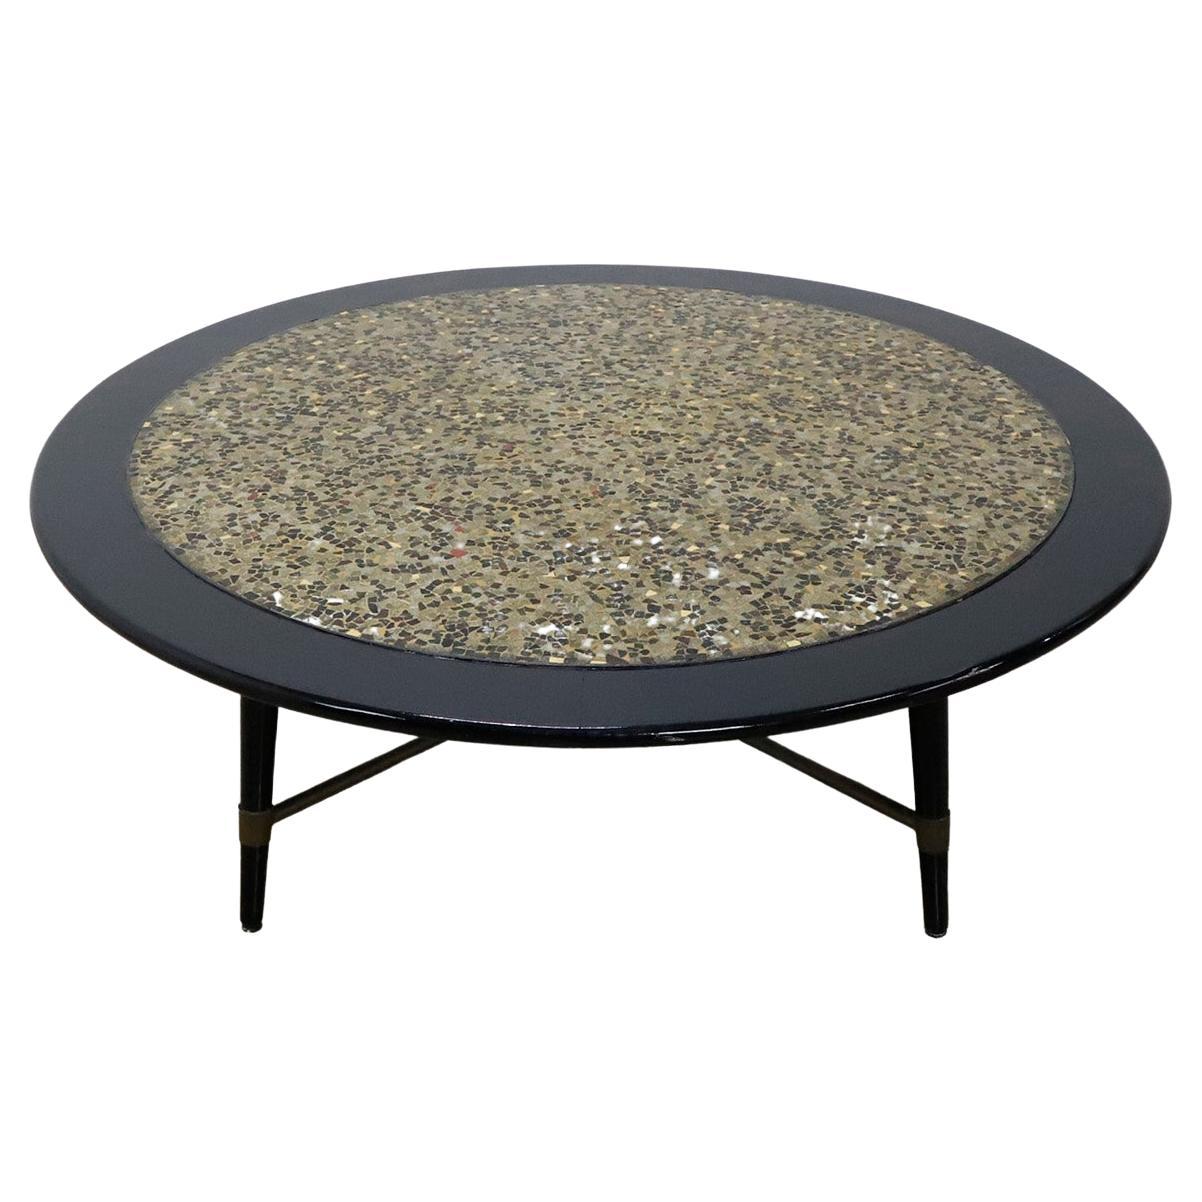 Midcentury Mosaic Center Table made with Precious Stones For Sale